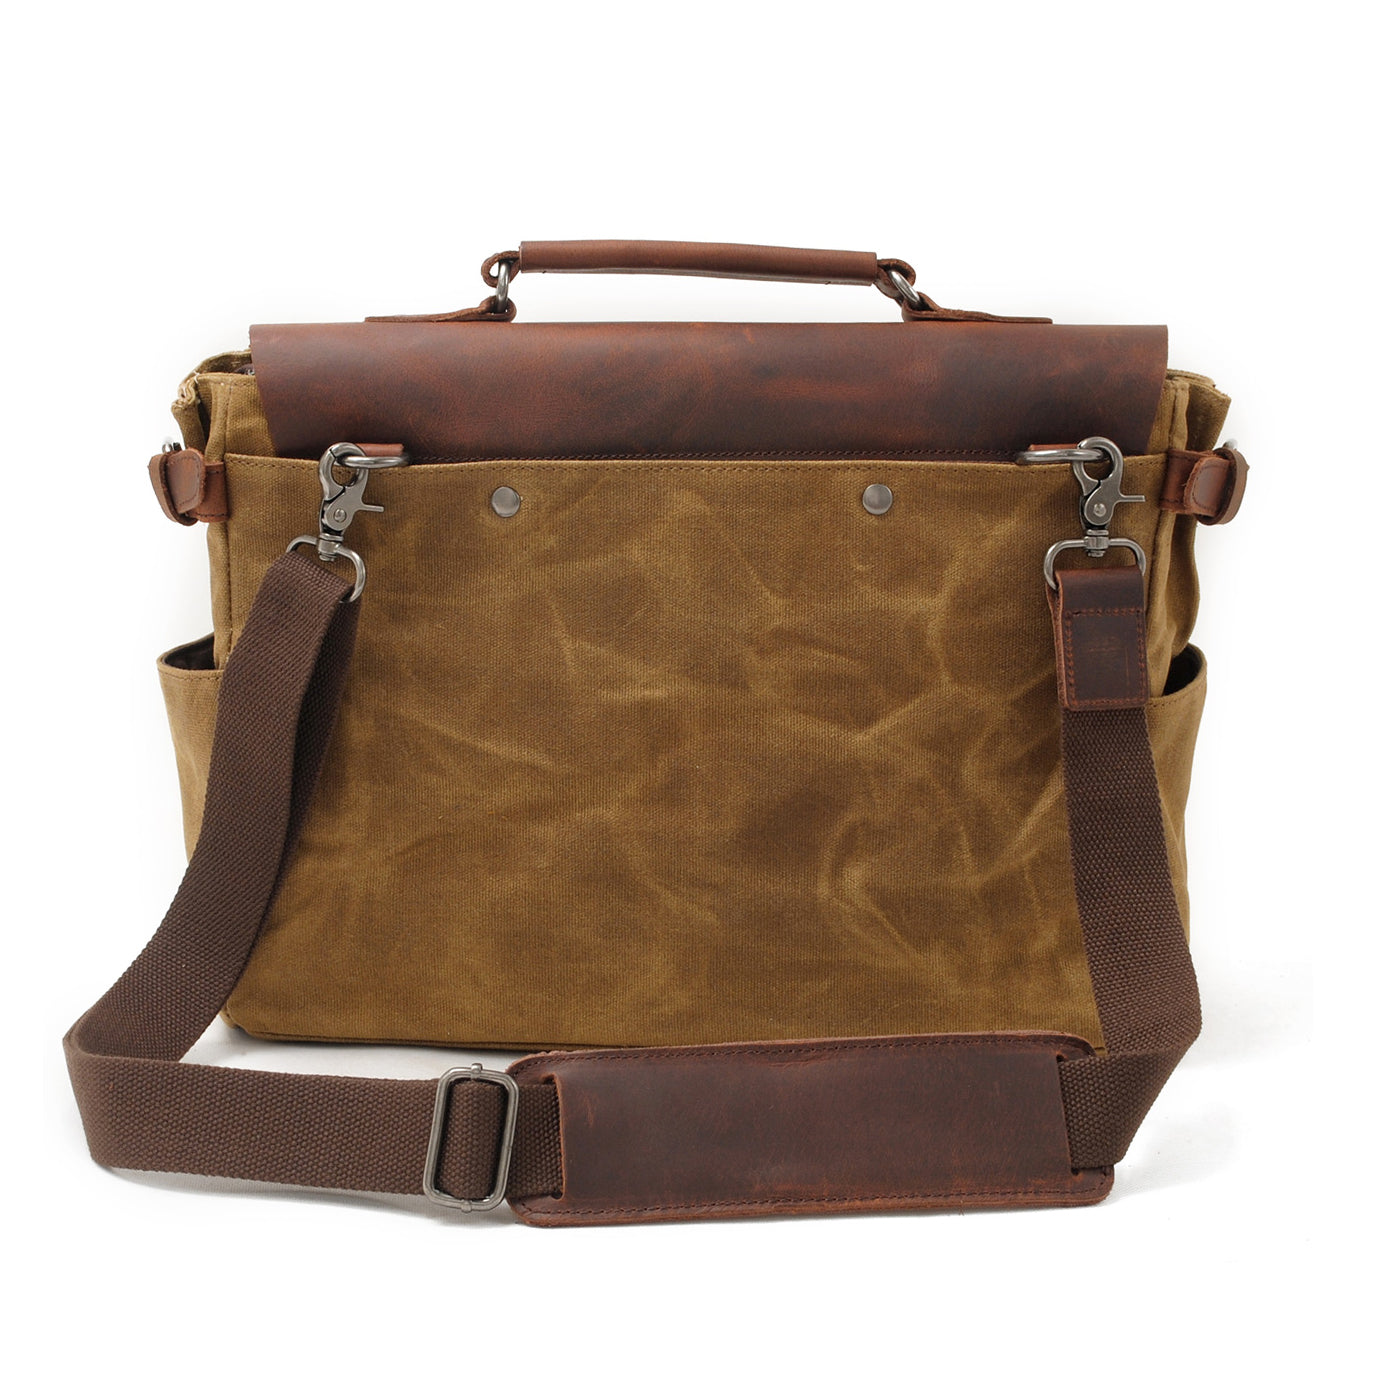 Vintage-Waxed-Canvas-and-Crazy-Horse-Leather-Laptop-Messenger-Bag-Khaki-i7bags-3